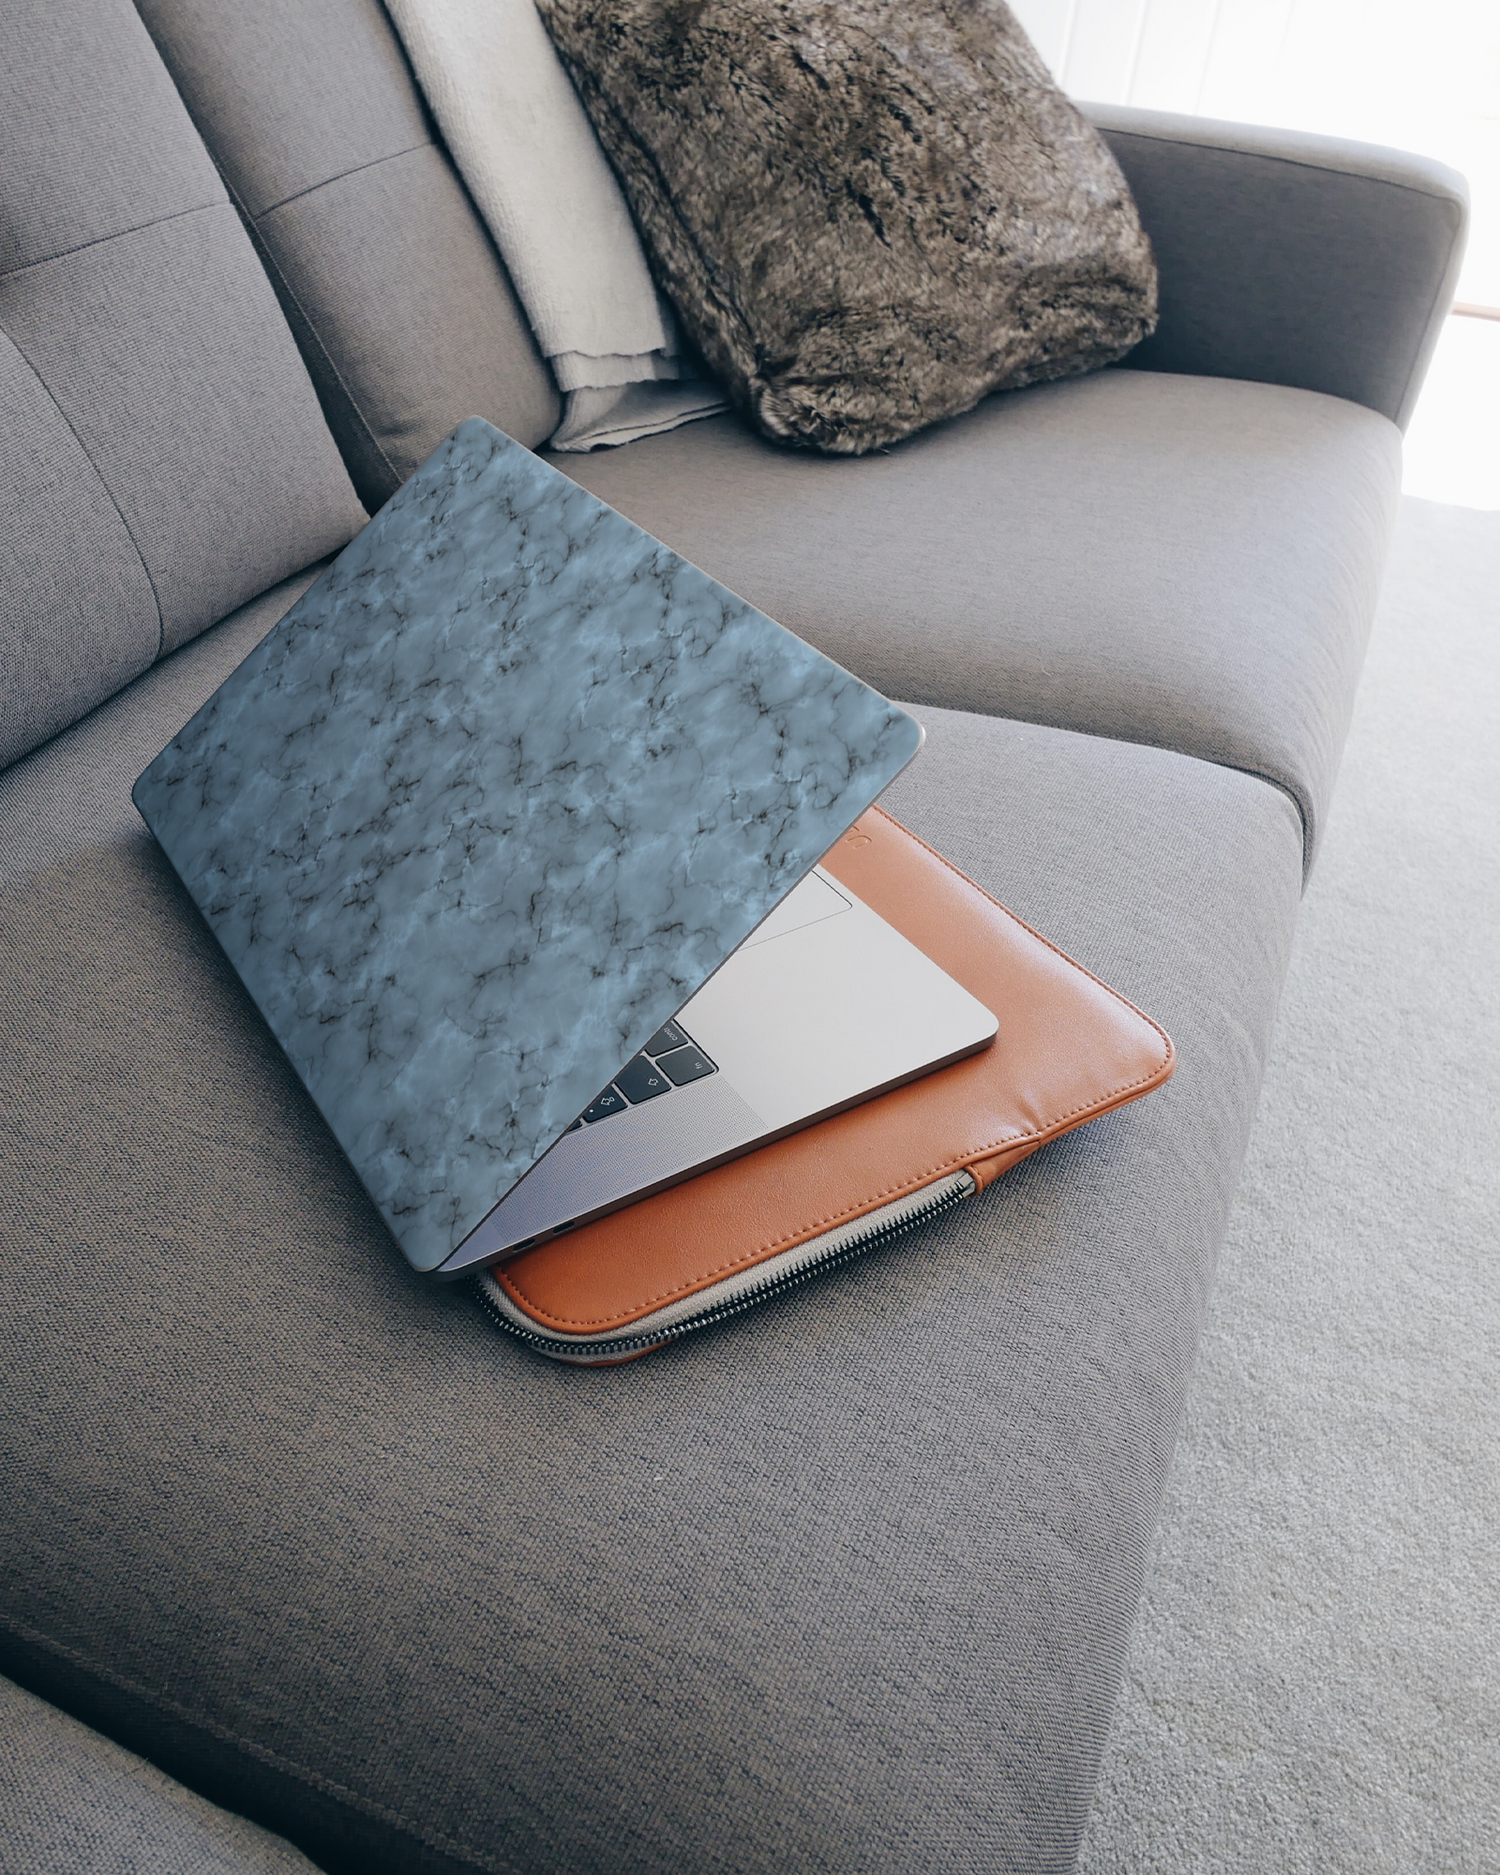 Blue Marble Laptop Skin for 15 inch Apple MacBooks on a couch